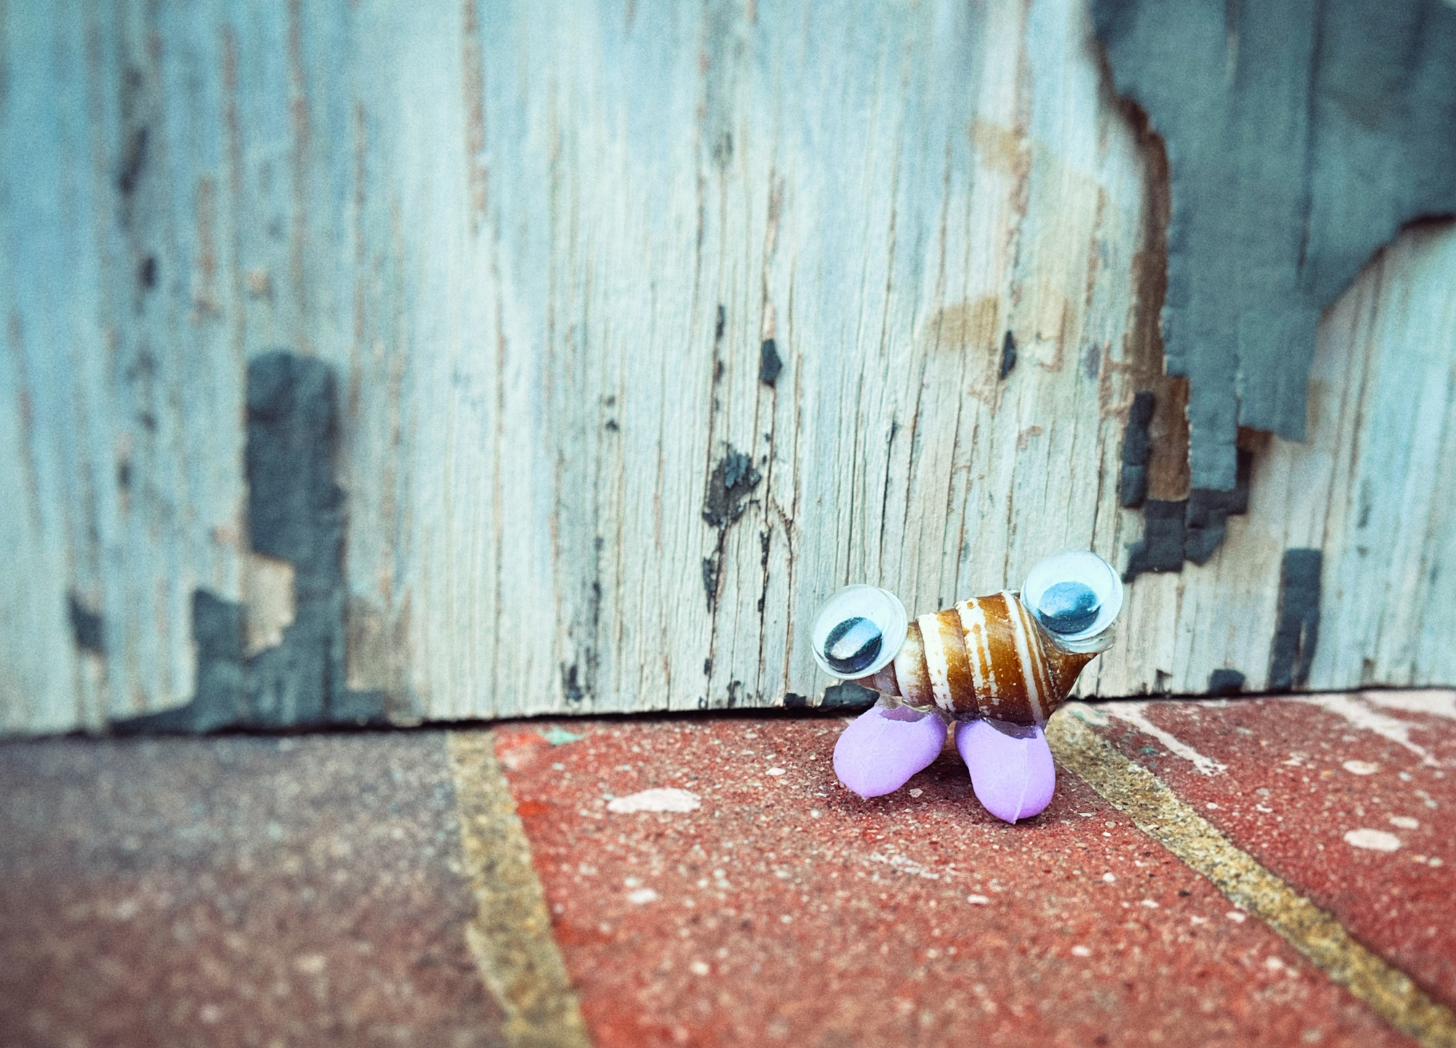 A small seashell with google eyes and purple plastic shoes glued onto it standing on some bricks next to some grey rusted and peeling paint.